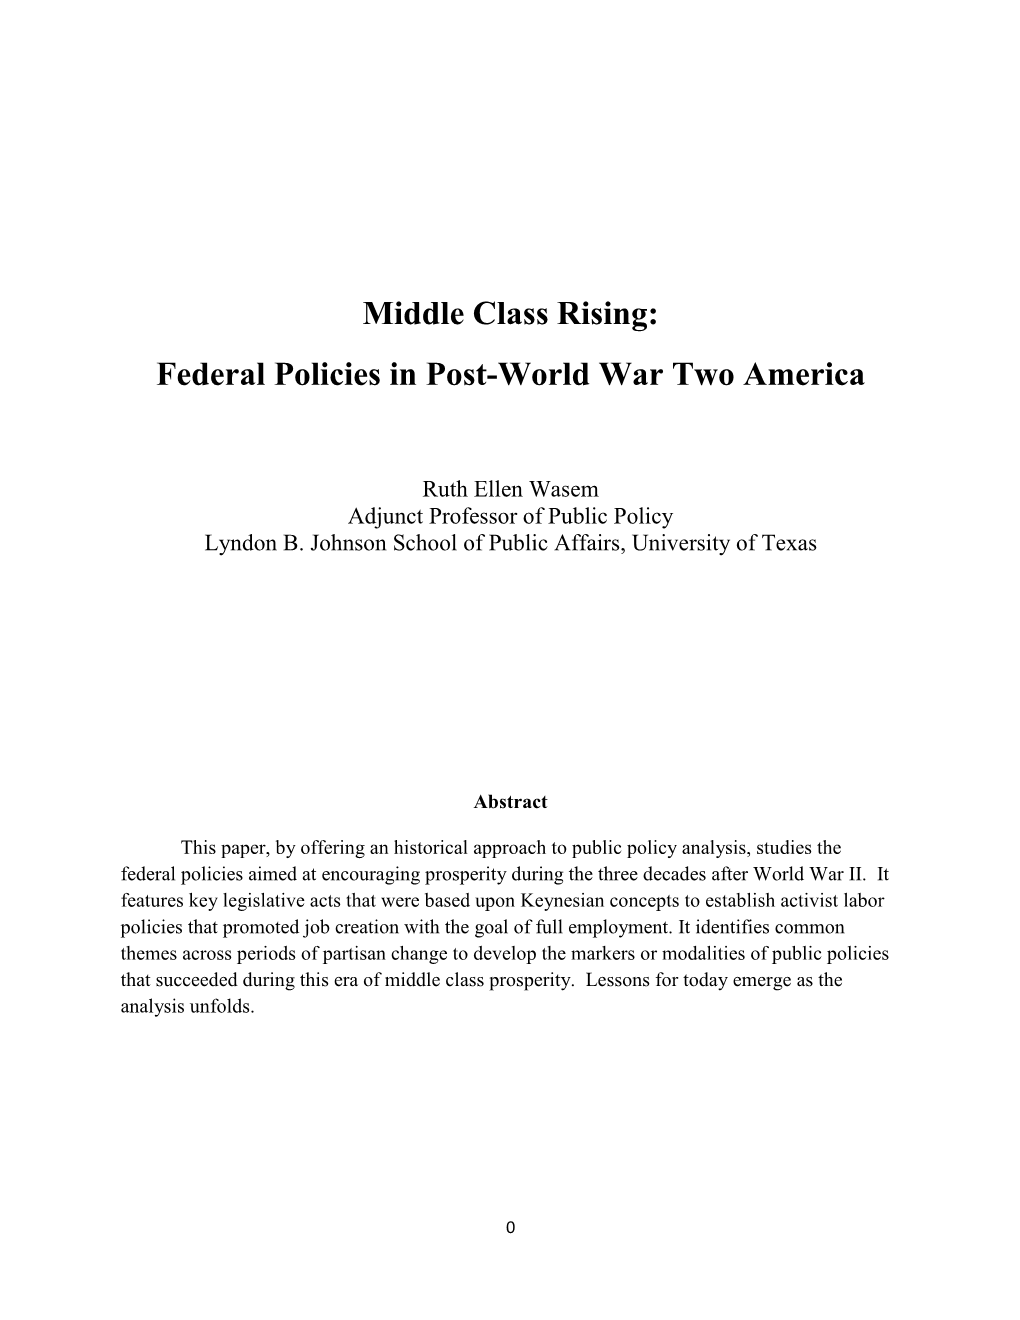 Middle Class Rising: Federal Policies in Post-World War Two America